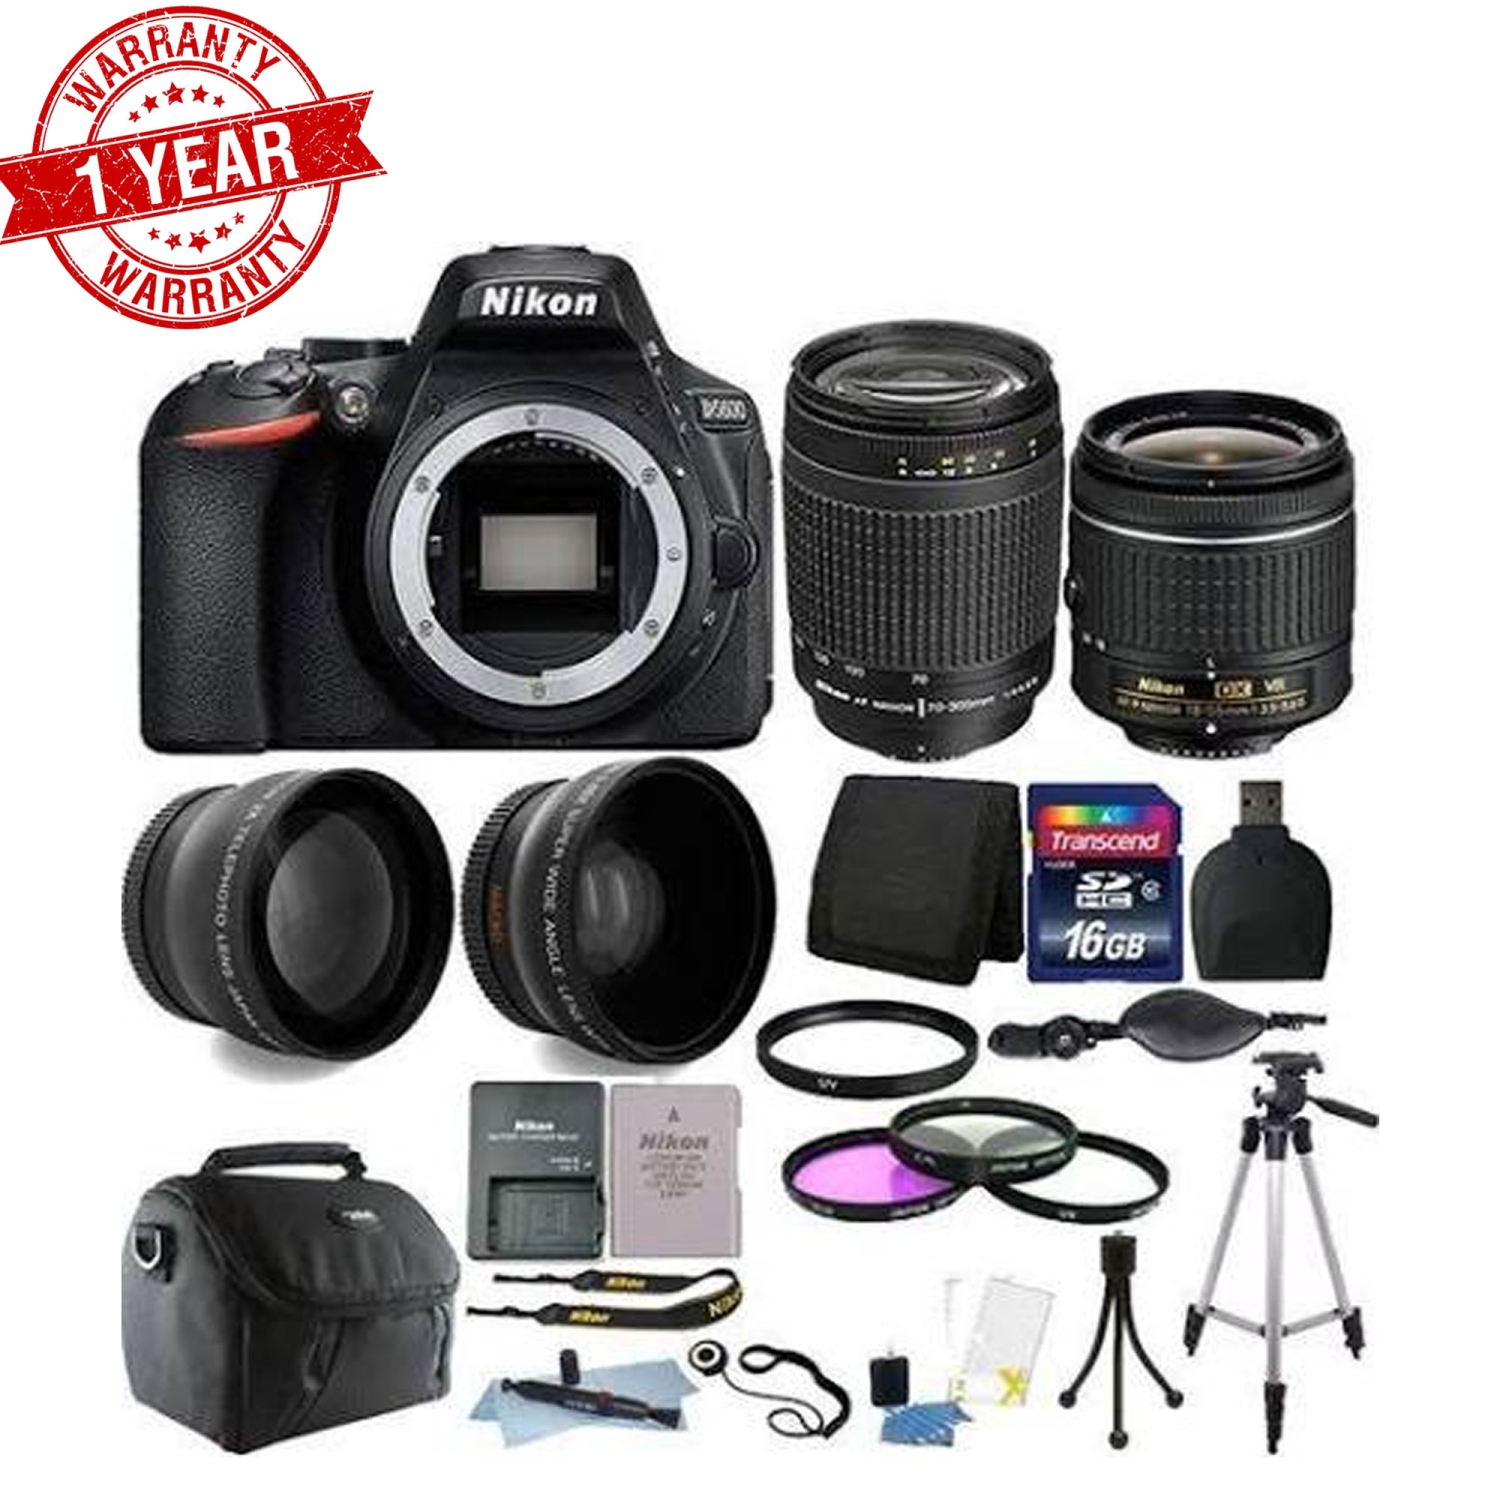 Nikon D3400 24MP D-SLR Camera with 18-55mm 70-300mm Lens and 32GB Accessory Kit - US Version w/ Seller Warranty